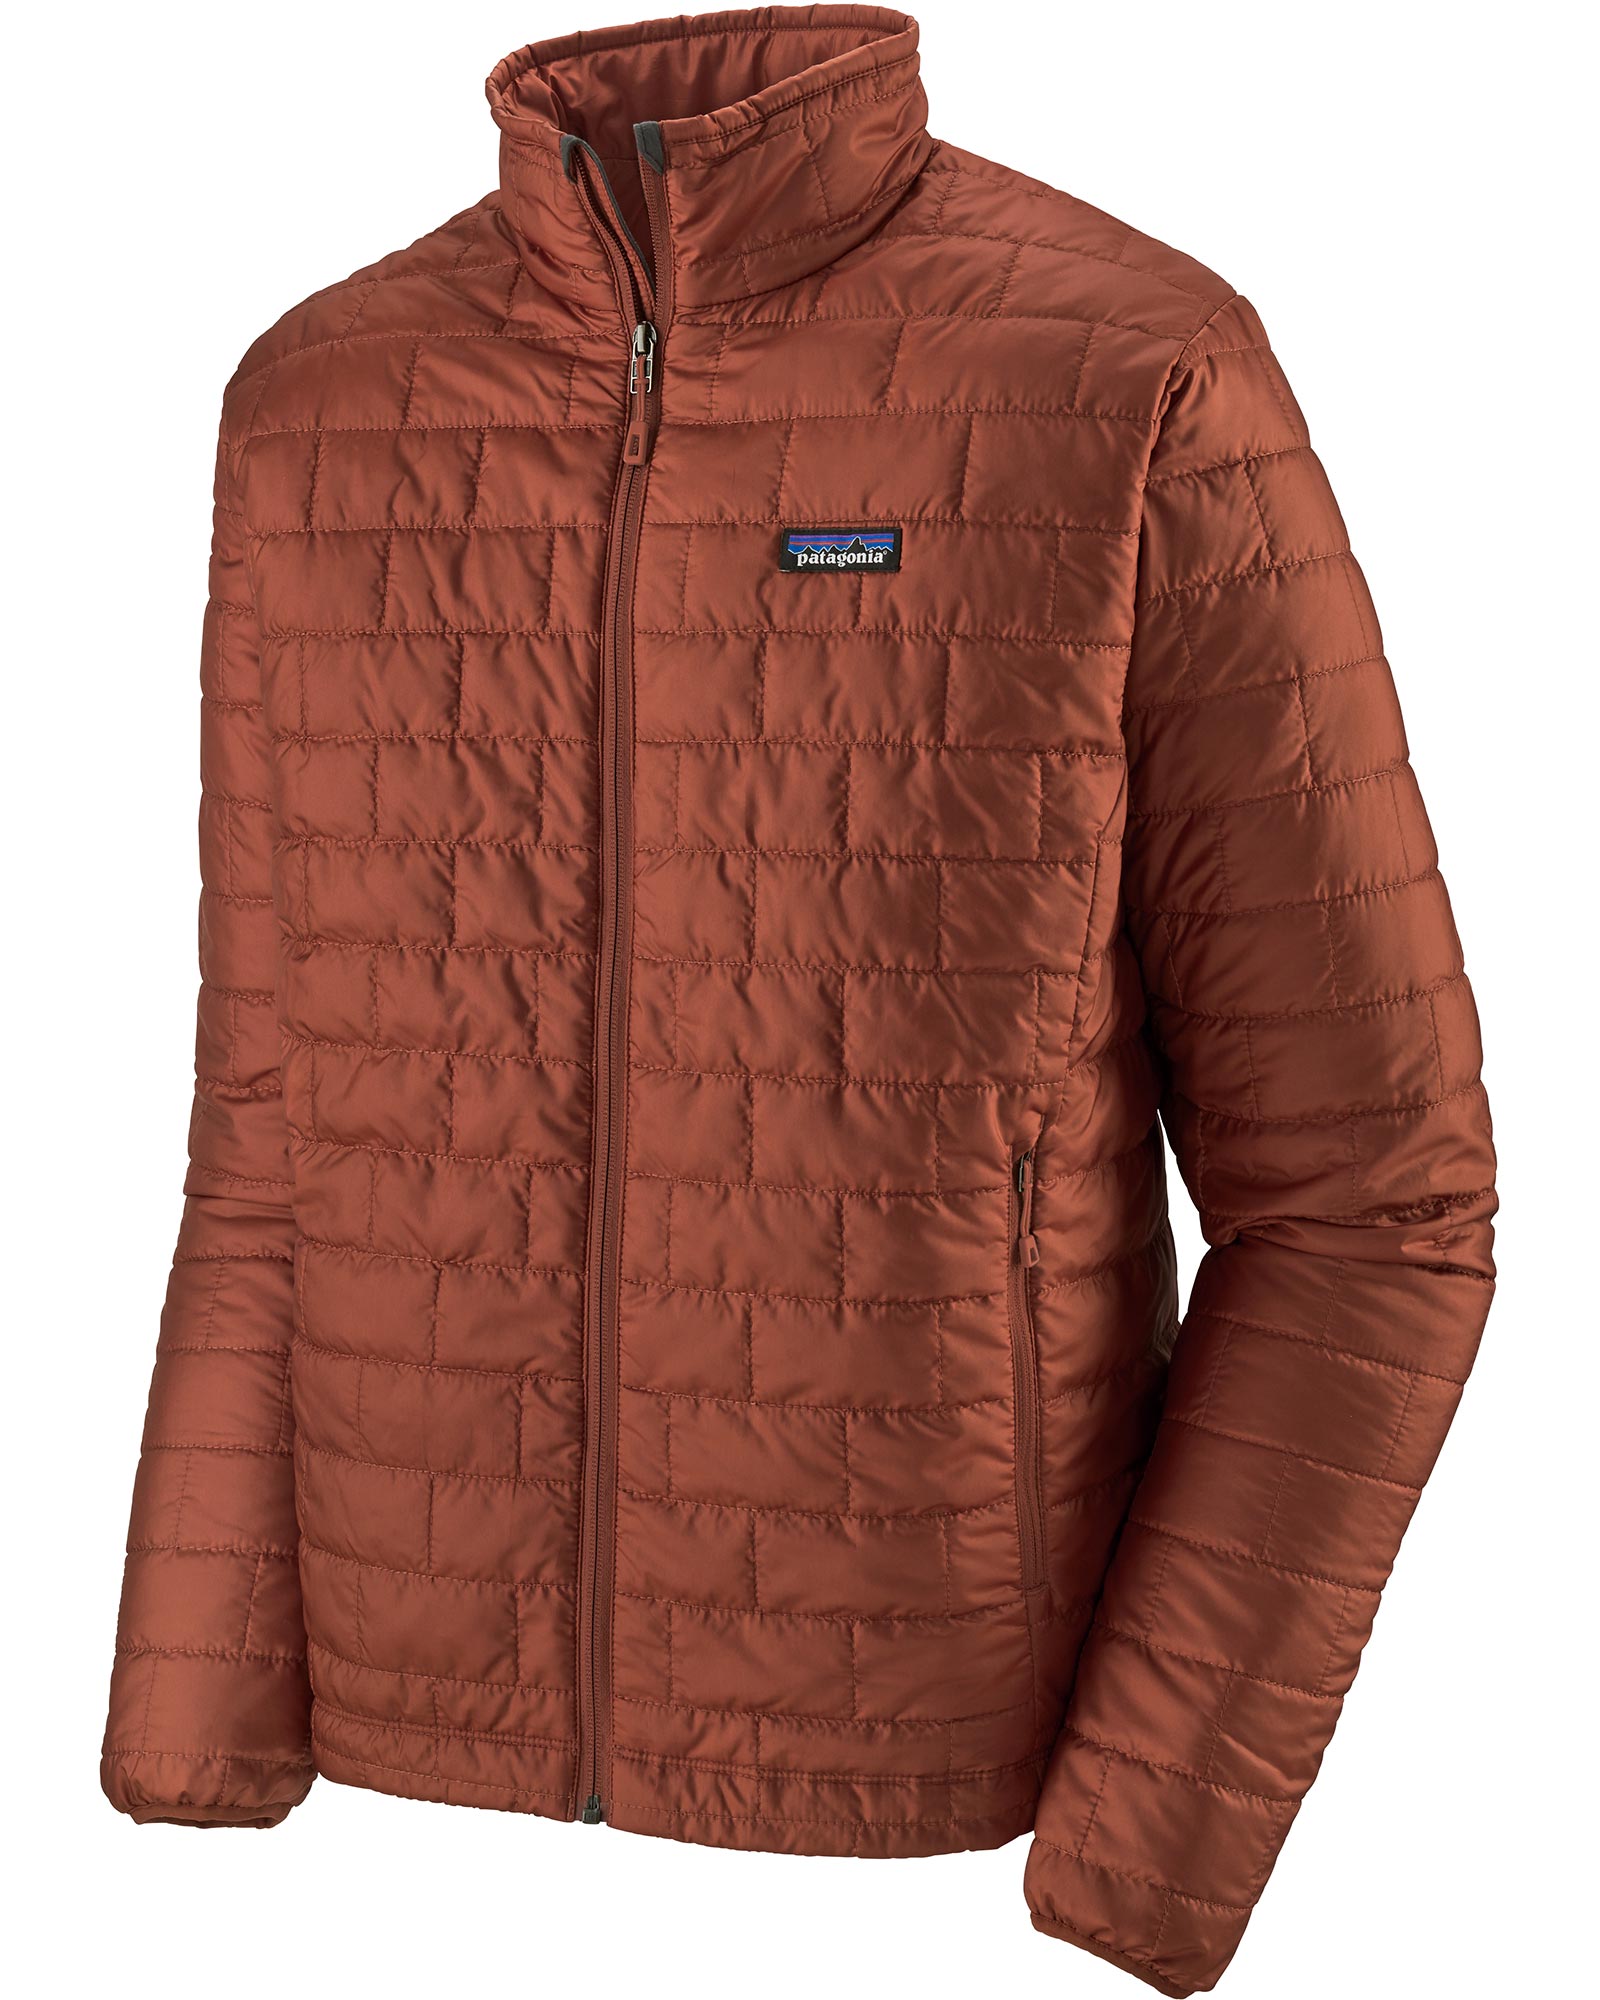 Patagonia Nano Puff Men’s Insulated Jacket - Barn Red S